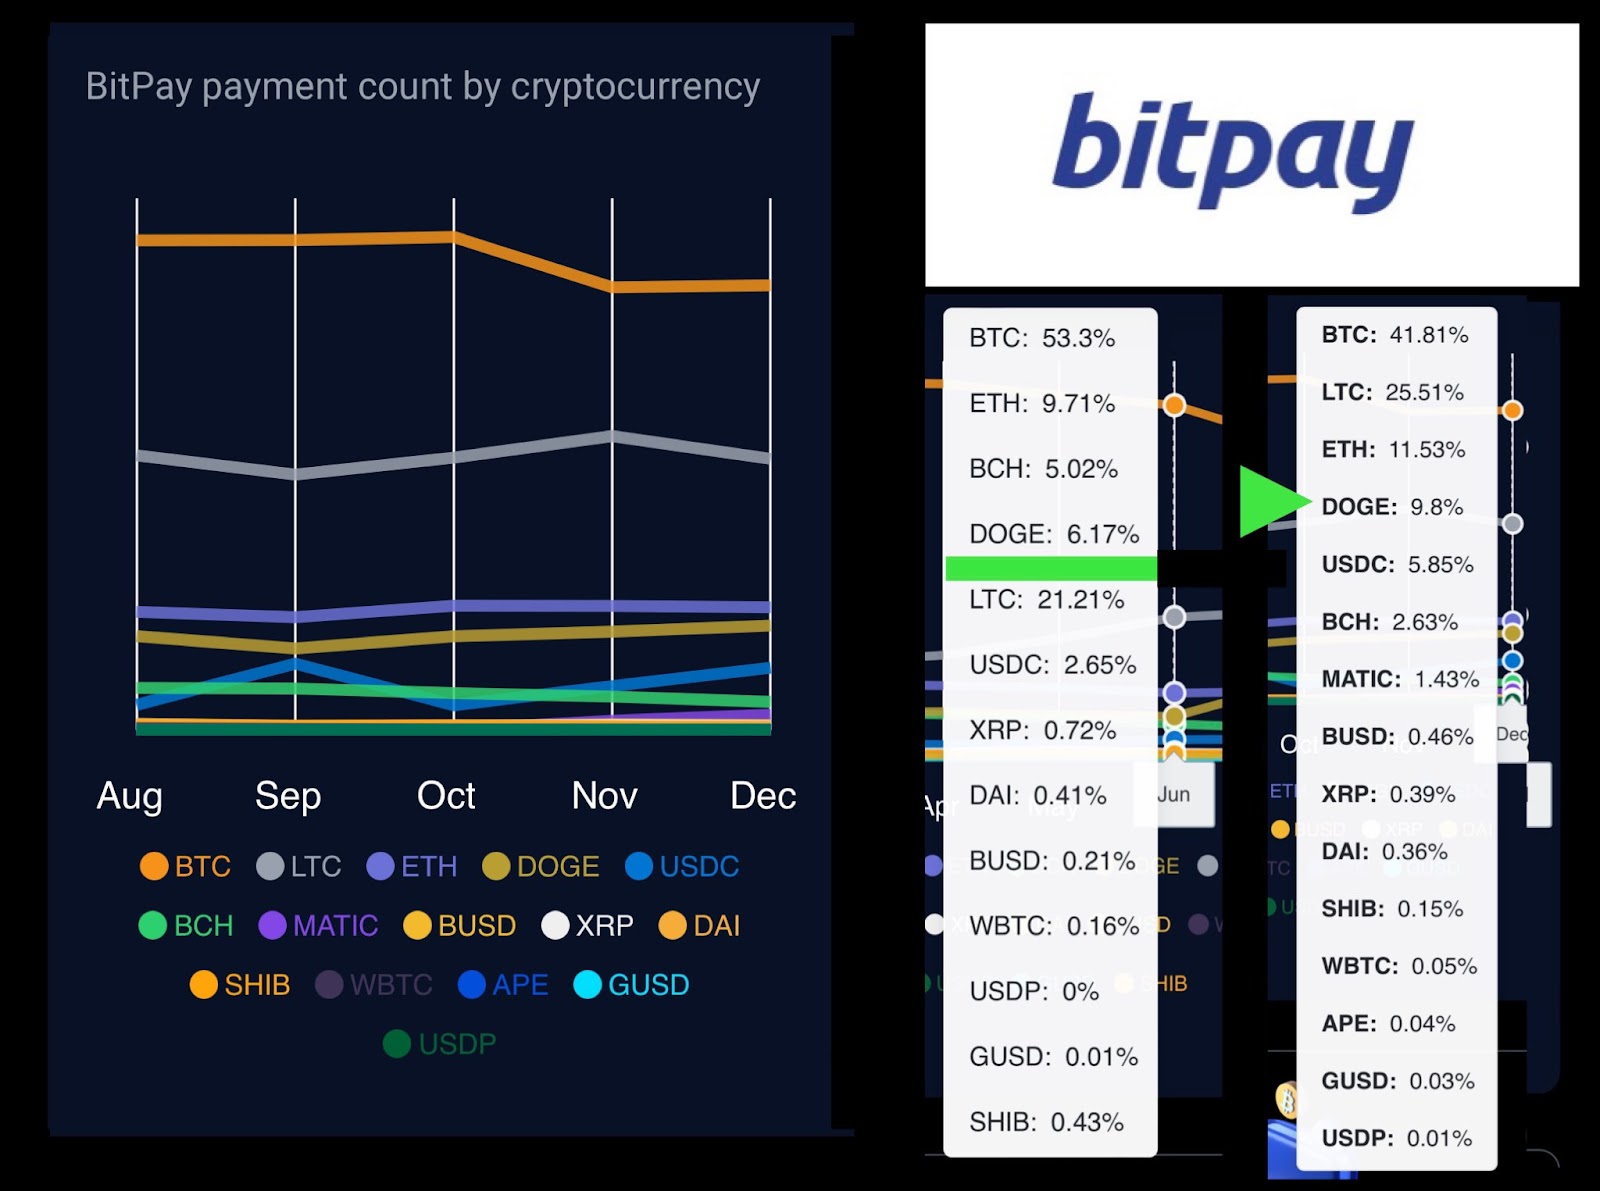 Bitpay payment count by cryptocurrency